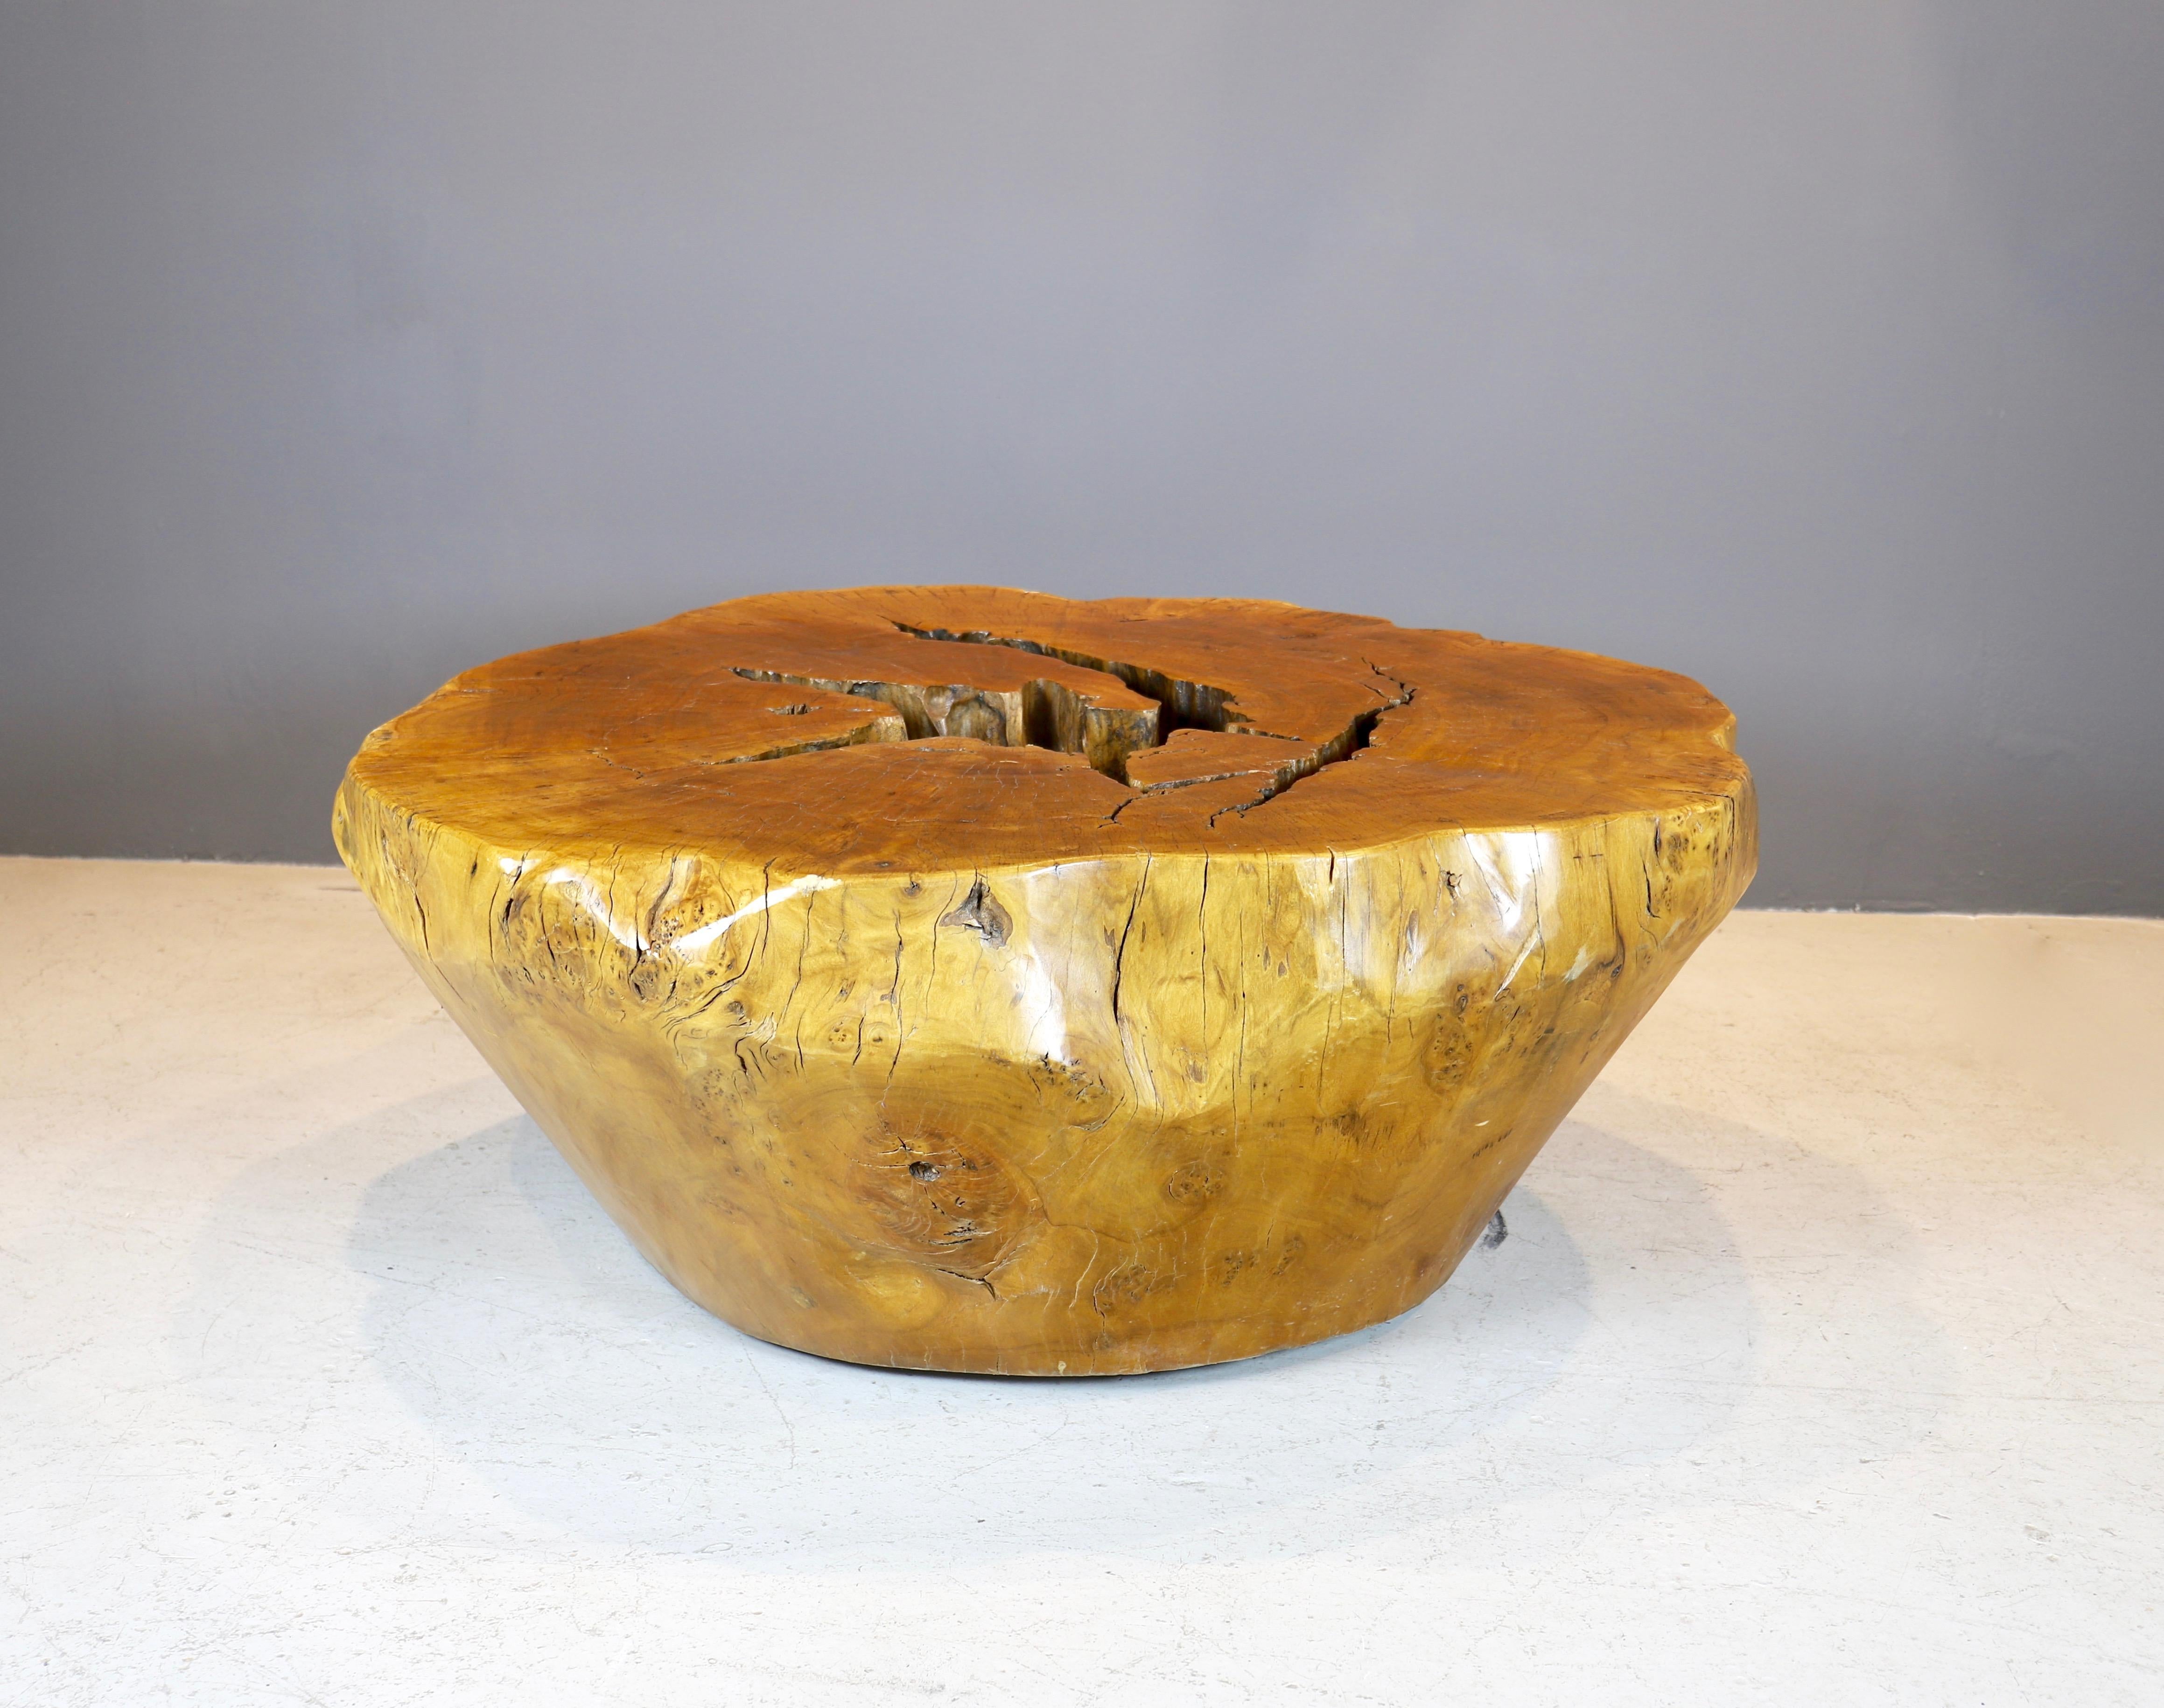 Large and impressive Itajai coffee table, made of pequi tree by contemporary Brazilian artist Hugo Franca.
Beautiful grain and natural cavity. The pequi tree possesses water-proof resin that is resistant to weather conditions.
